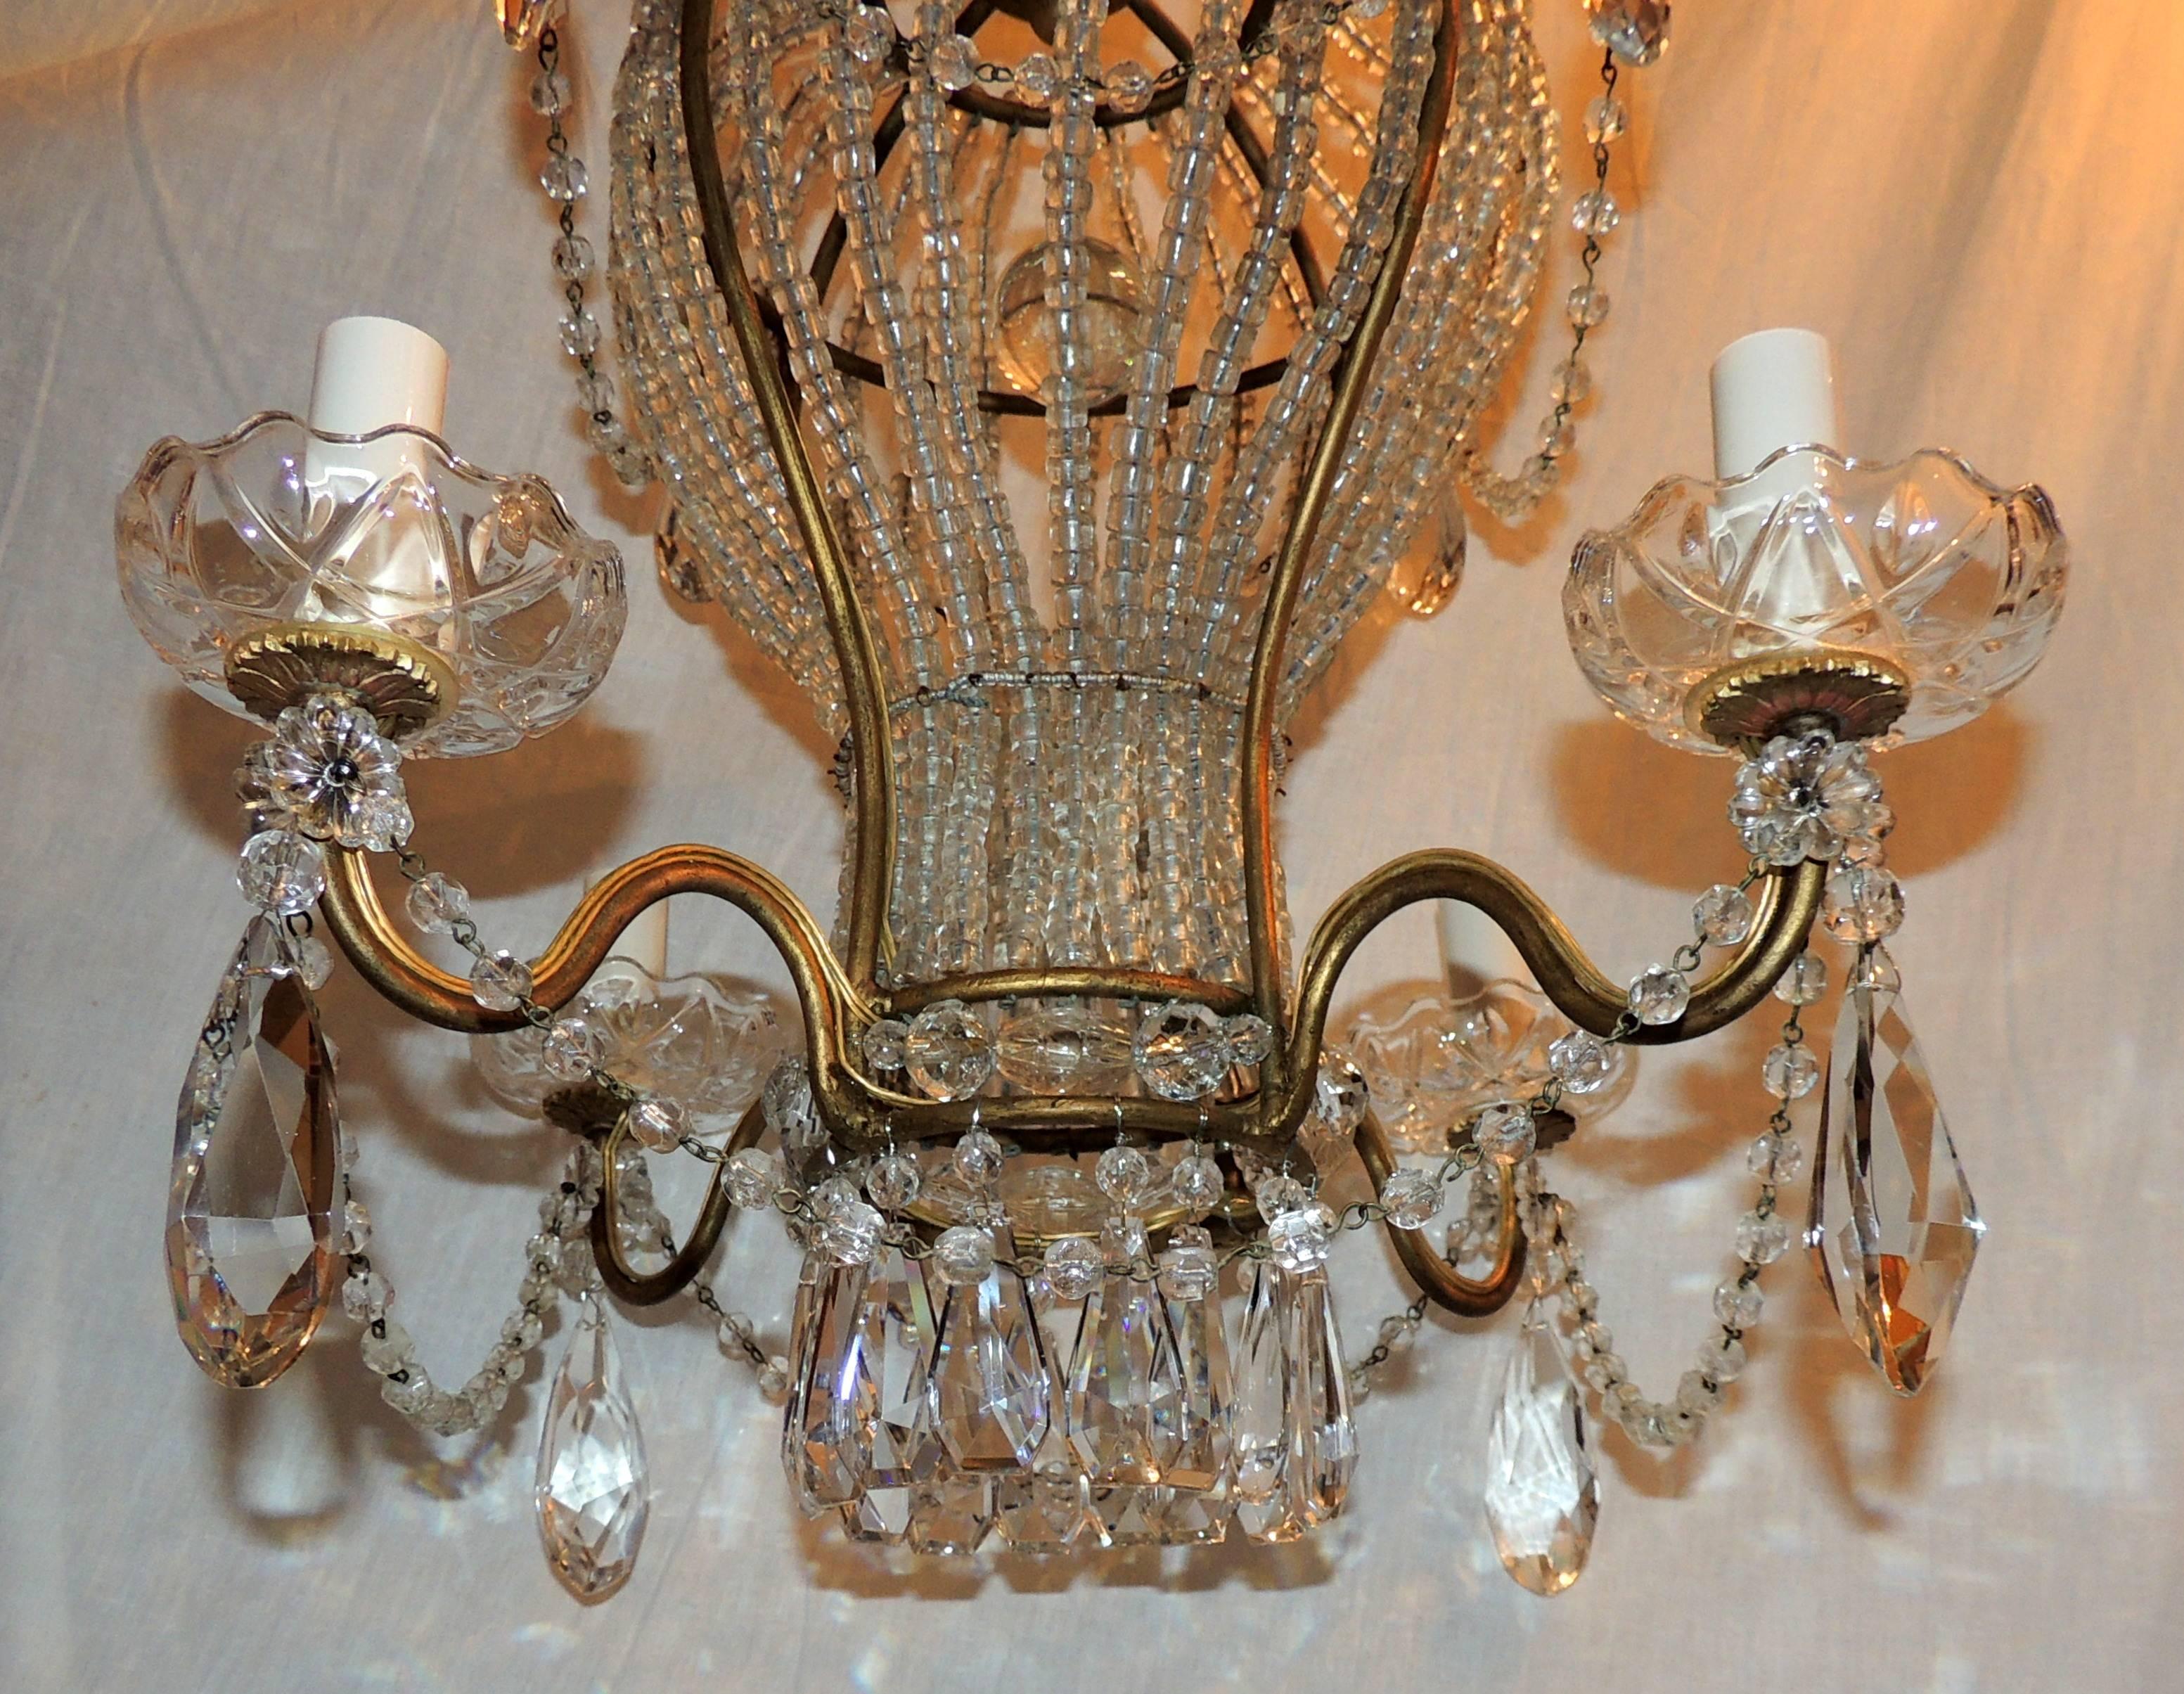 A wonderful vintage Italian gilt and beaded crystal hot air balloon chandelier light fixture with beaded crystal swags and adorned with cut crystal drops throughout. Completely redone and comes ready to install.

Actual fixture measures:
18